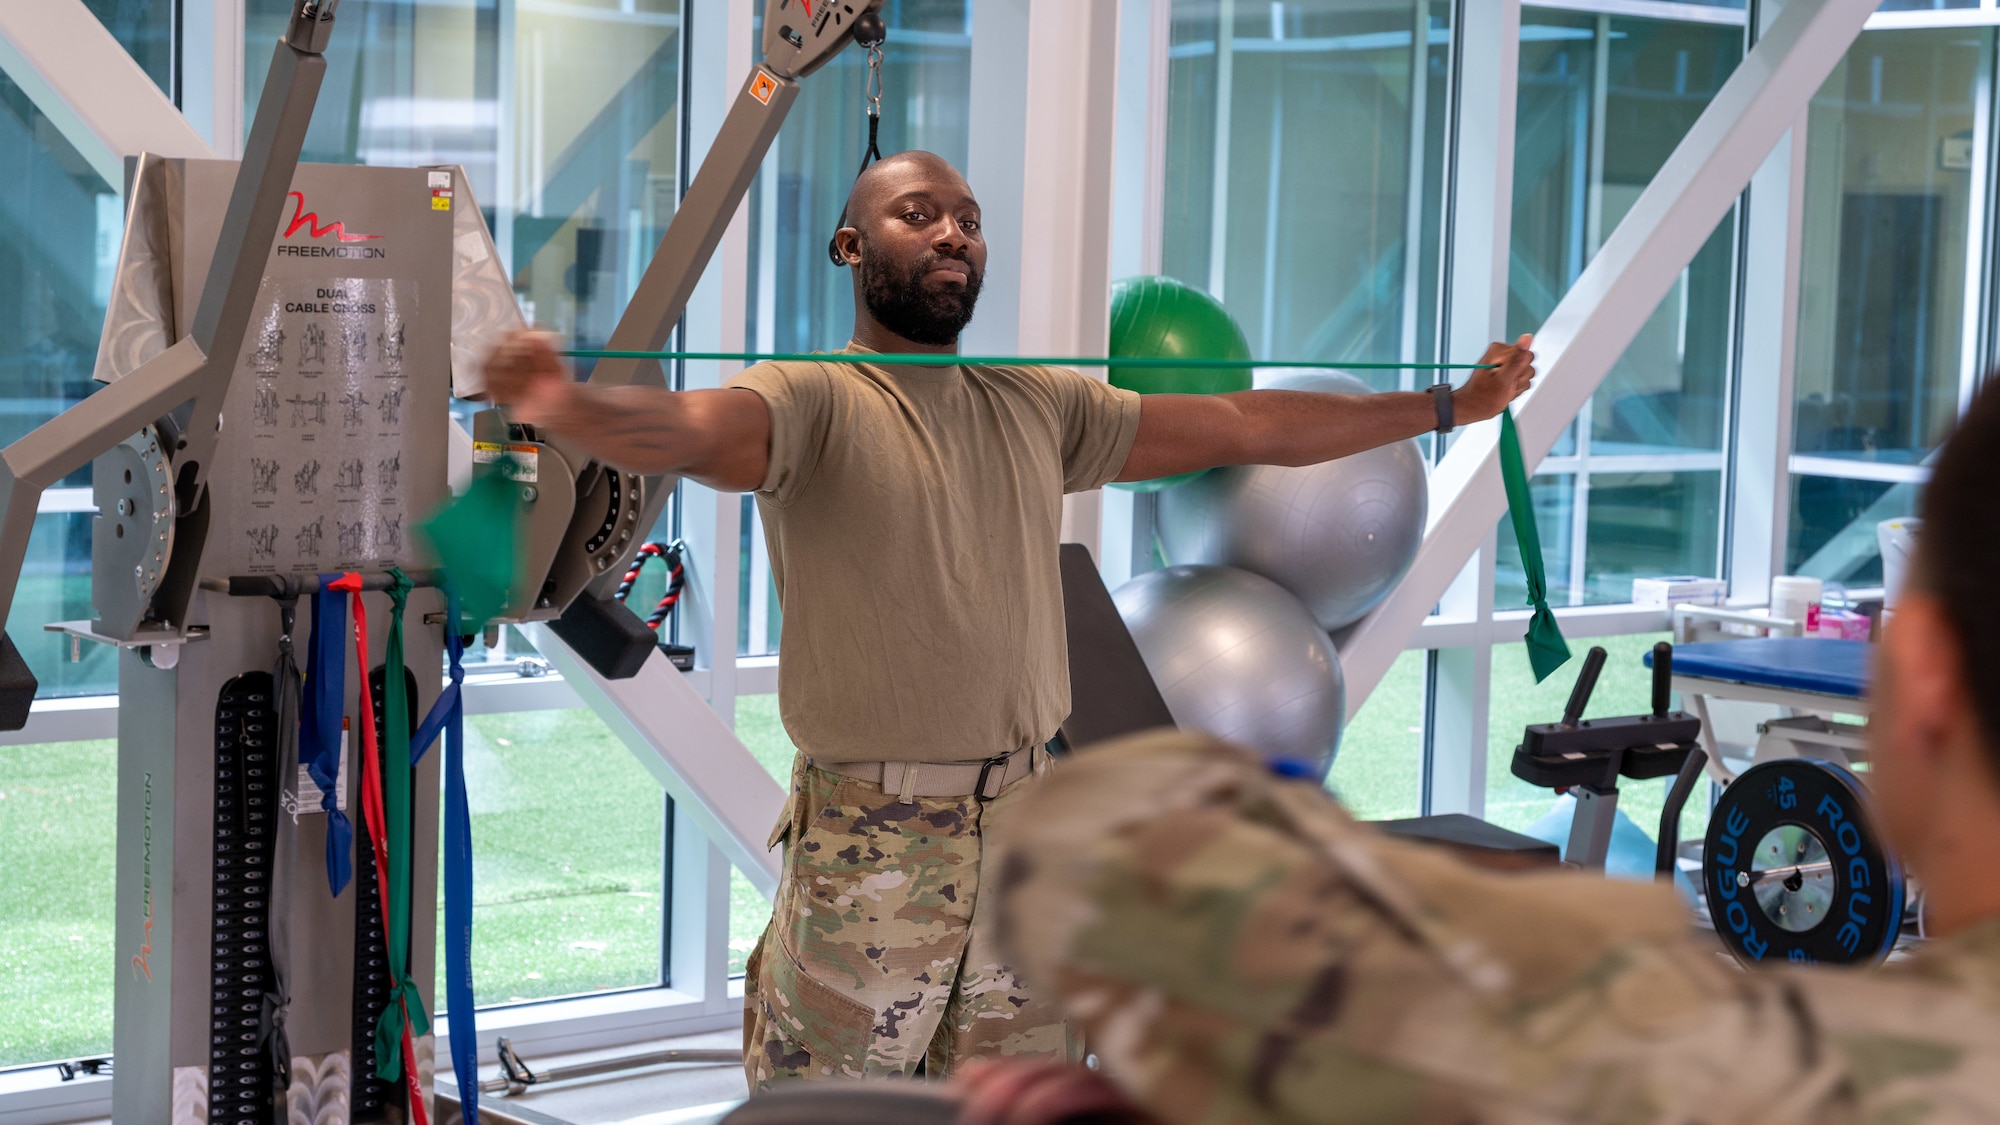 Tech. Sgt. Jarvis James, 567th Red Horse Squadron unit training manager, exercises using a band at Seymour Johnson Air Force Base, North Carolina, June 22, 2023. The physical therapy clinic’s vision is to maintain professional Airmen ready to fight, and one of the wing commander’s priorities is to improve combat readiness. (U.S. Air Force photo by Airman 1st Class Leighton Lucero)